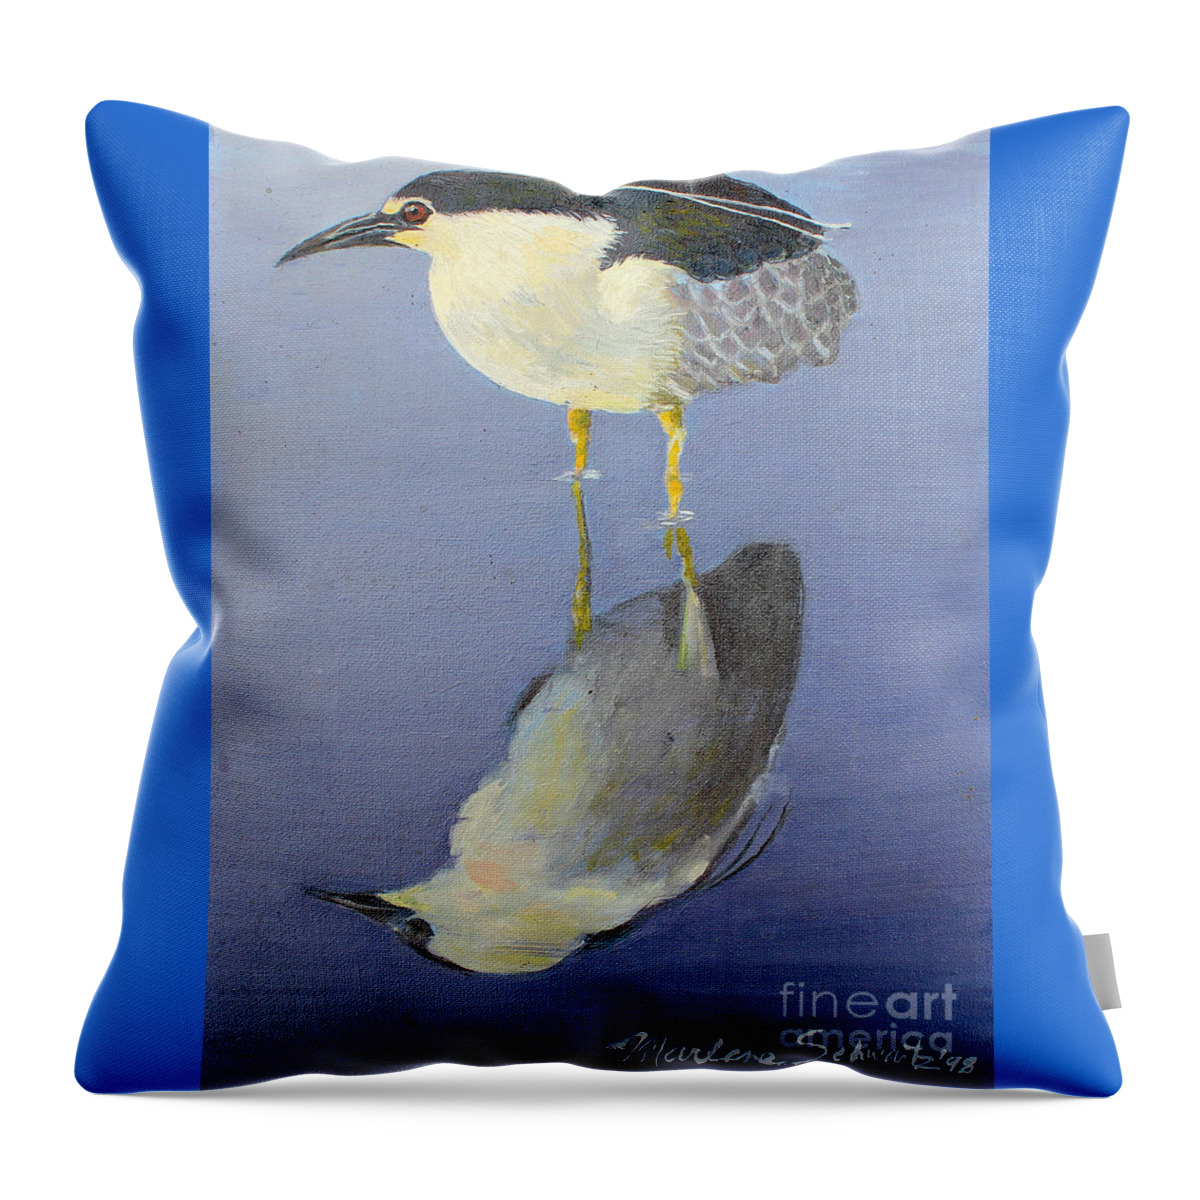 Heron Throw Pillow featuring the painting Cold Feet by Marlene Schwartz Massey